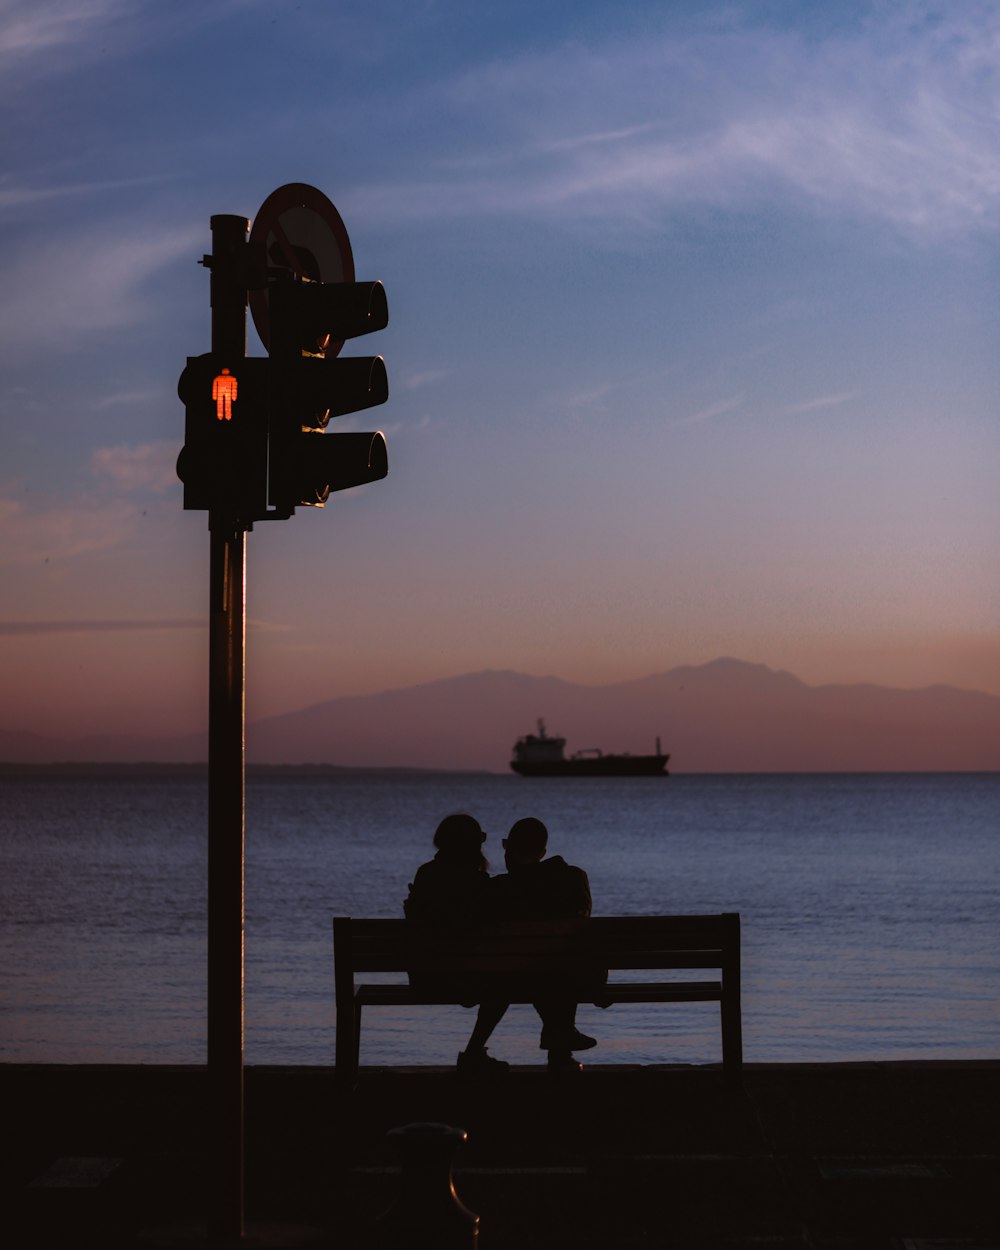 silhouette of person sitting on bench near body of water during sunset